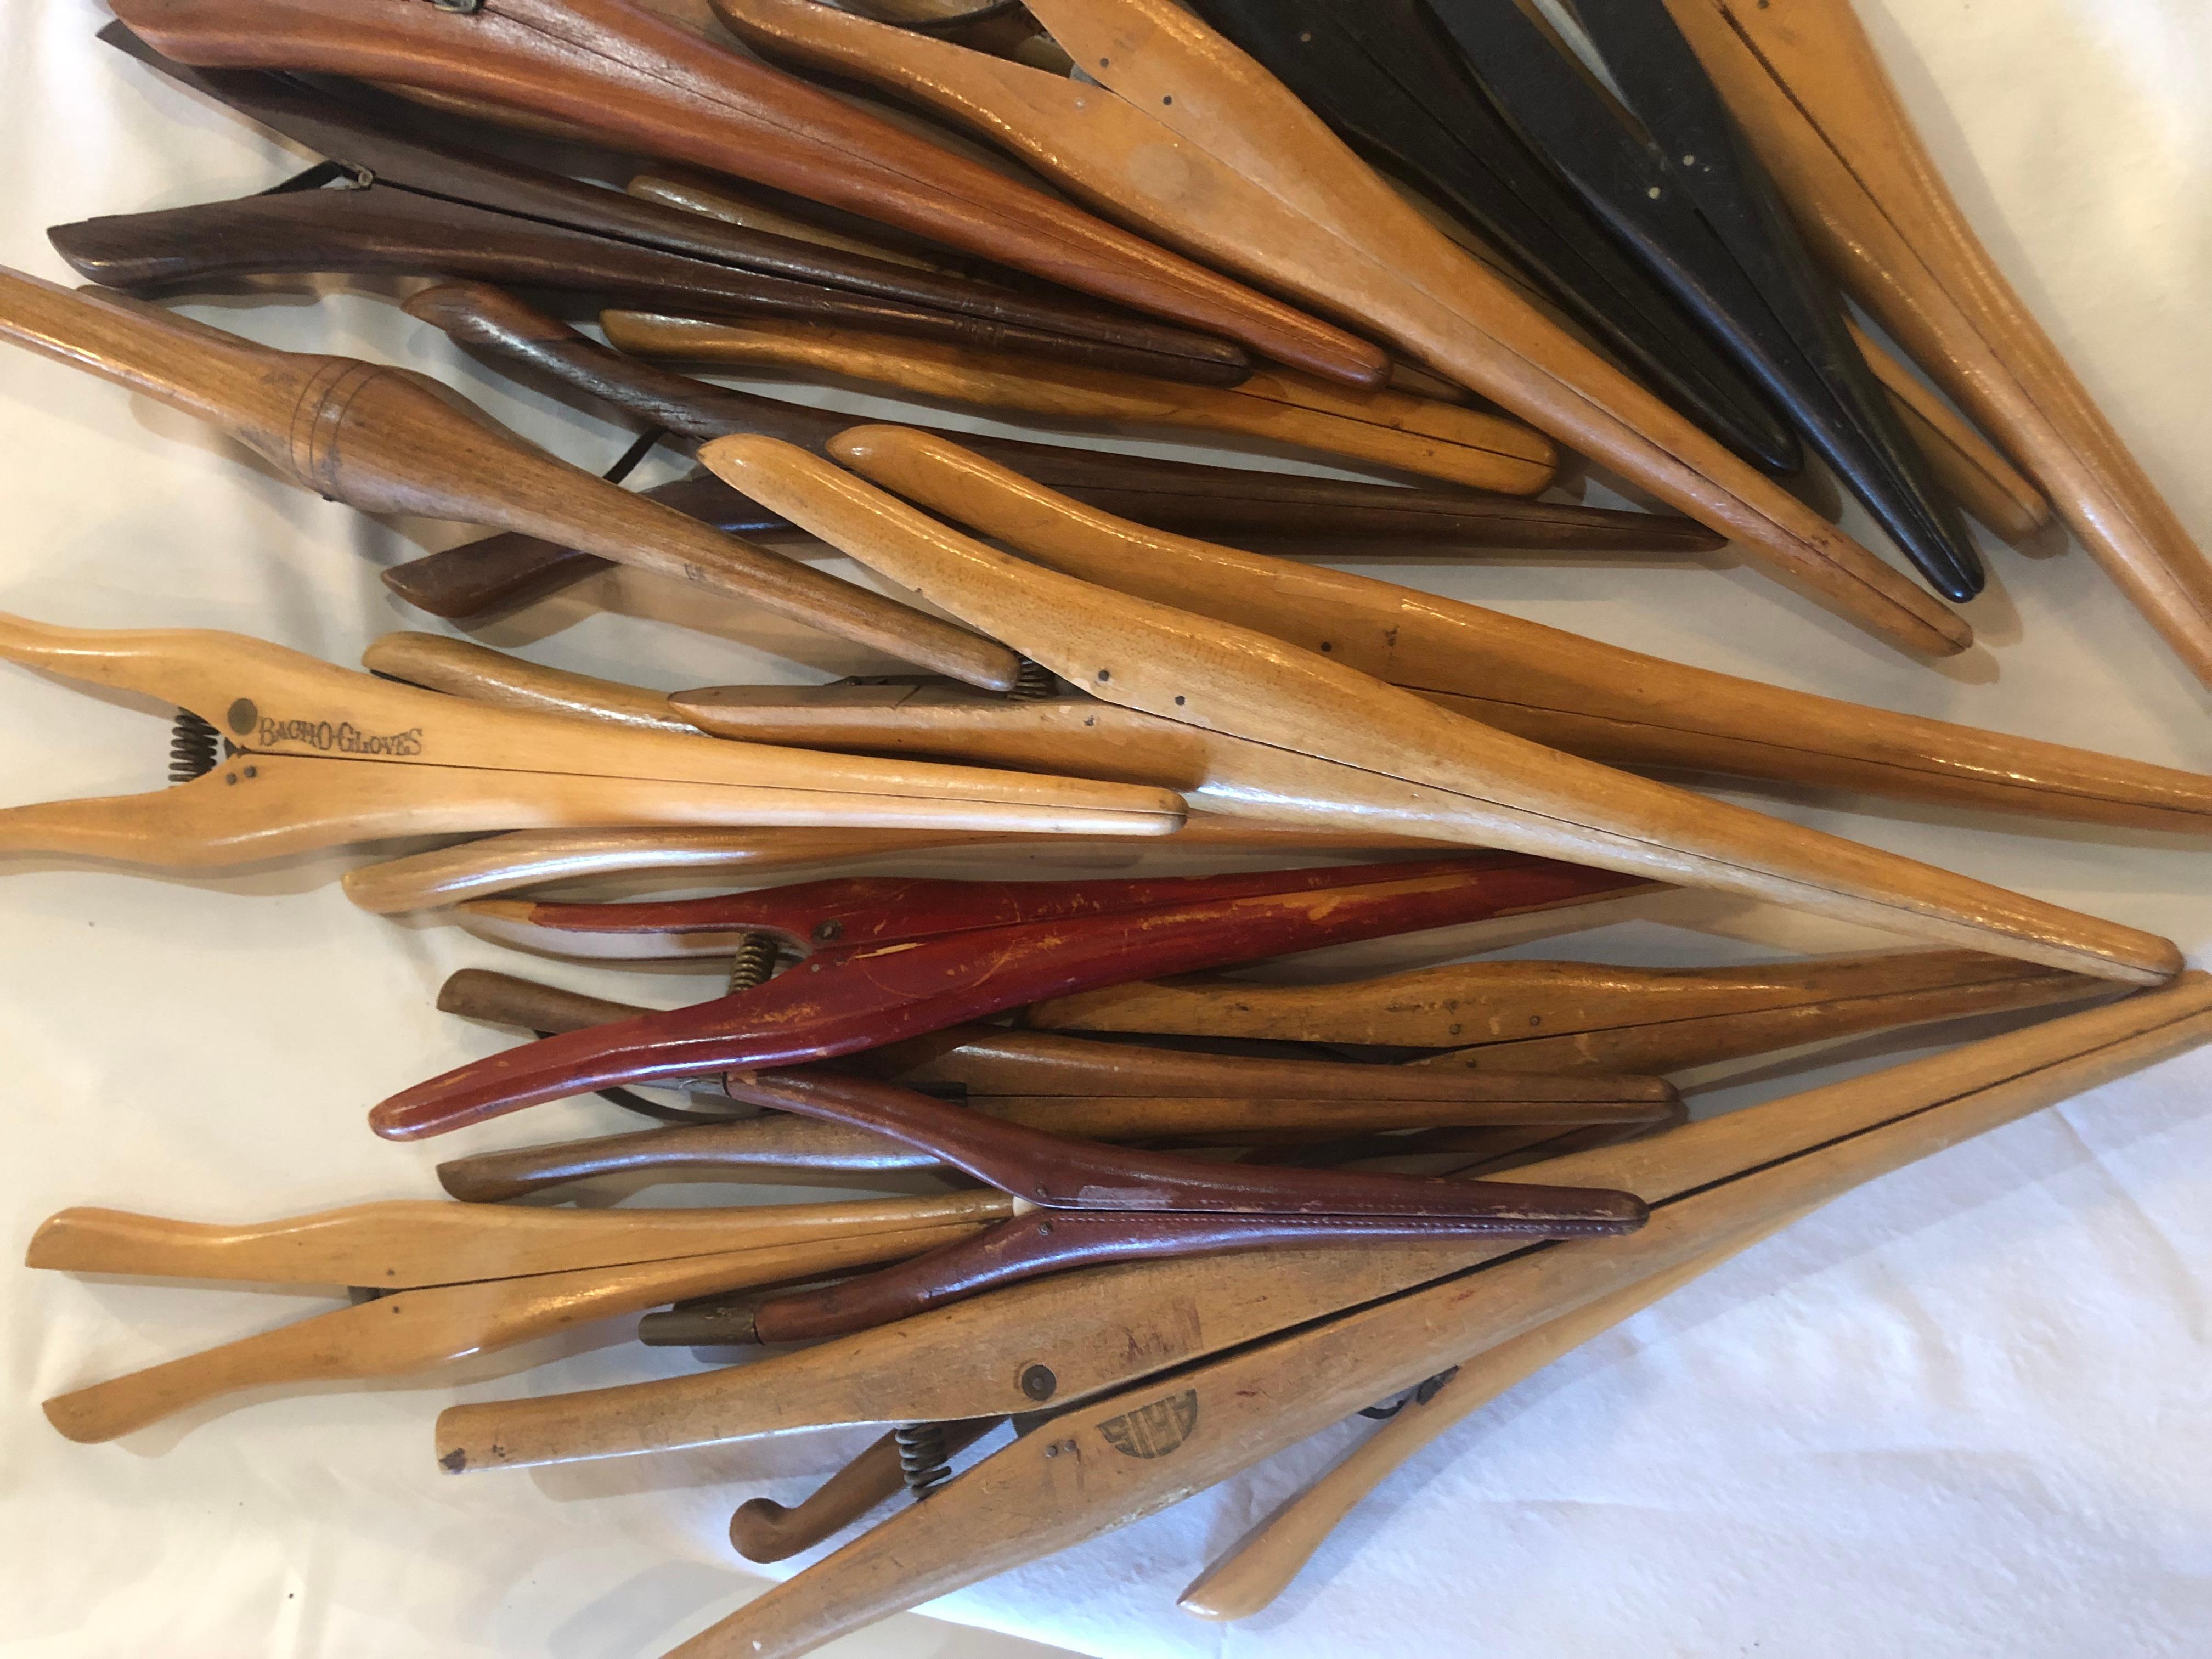 Collection of 24 wooden and colored antique spring action glove stretchers assorted manufacturers. The largest measures 14 inches, the smallest at 6 inches.